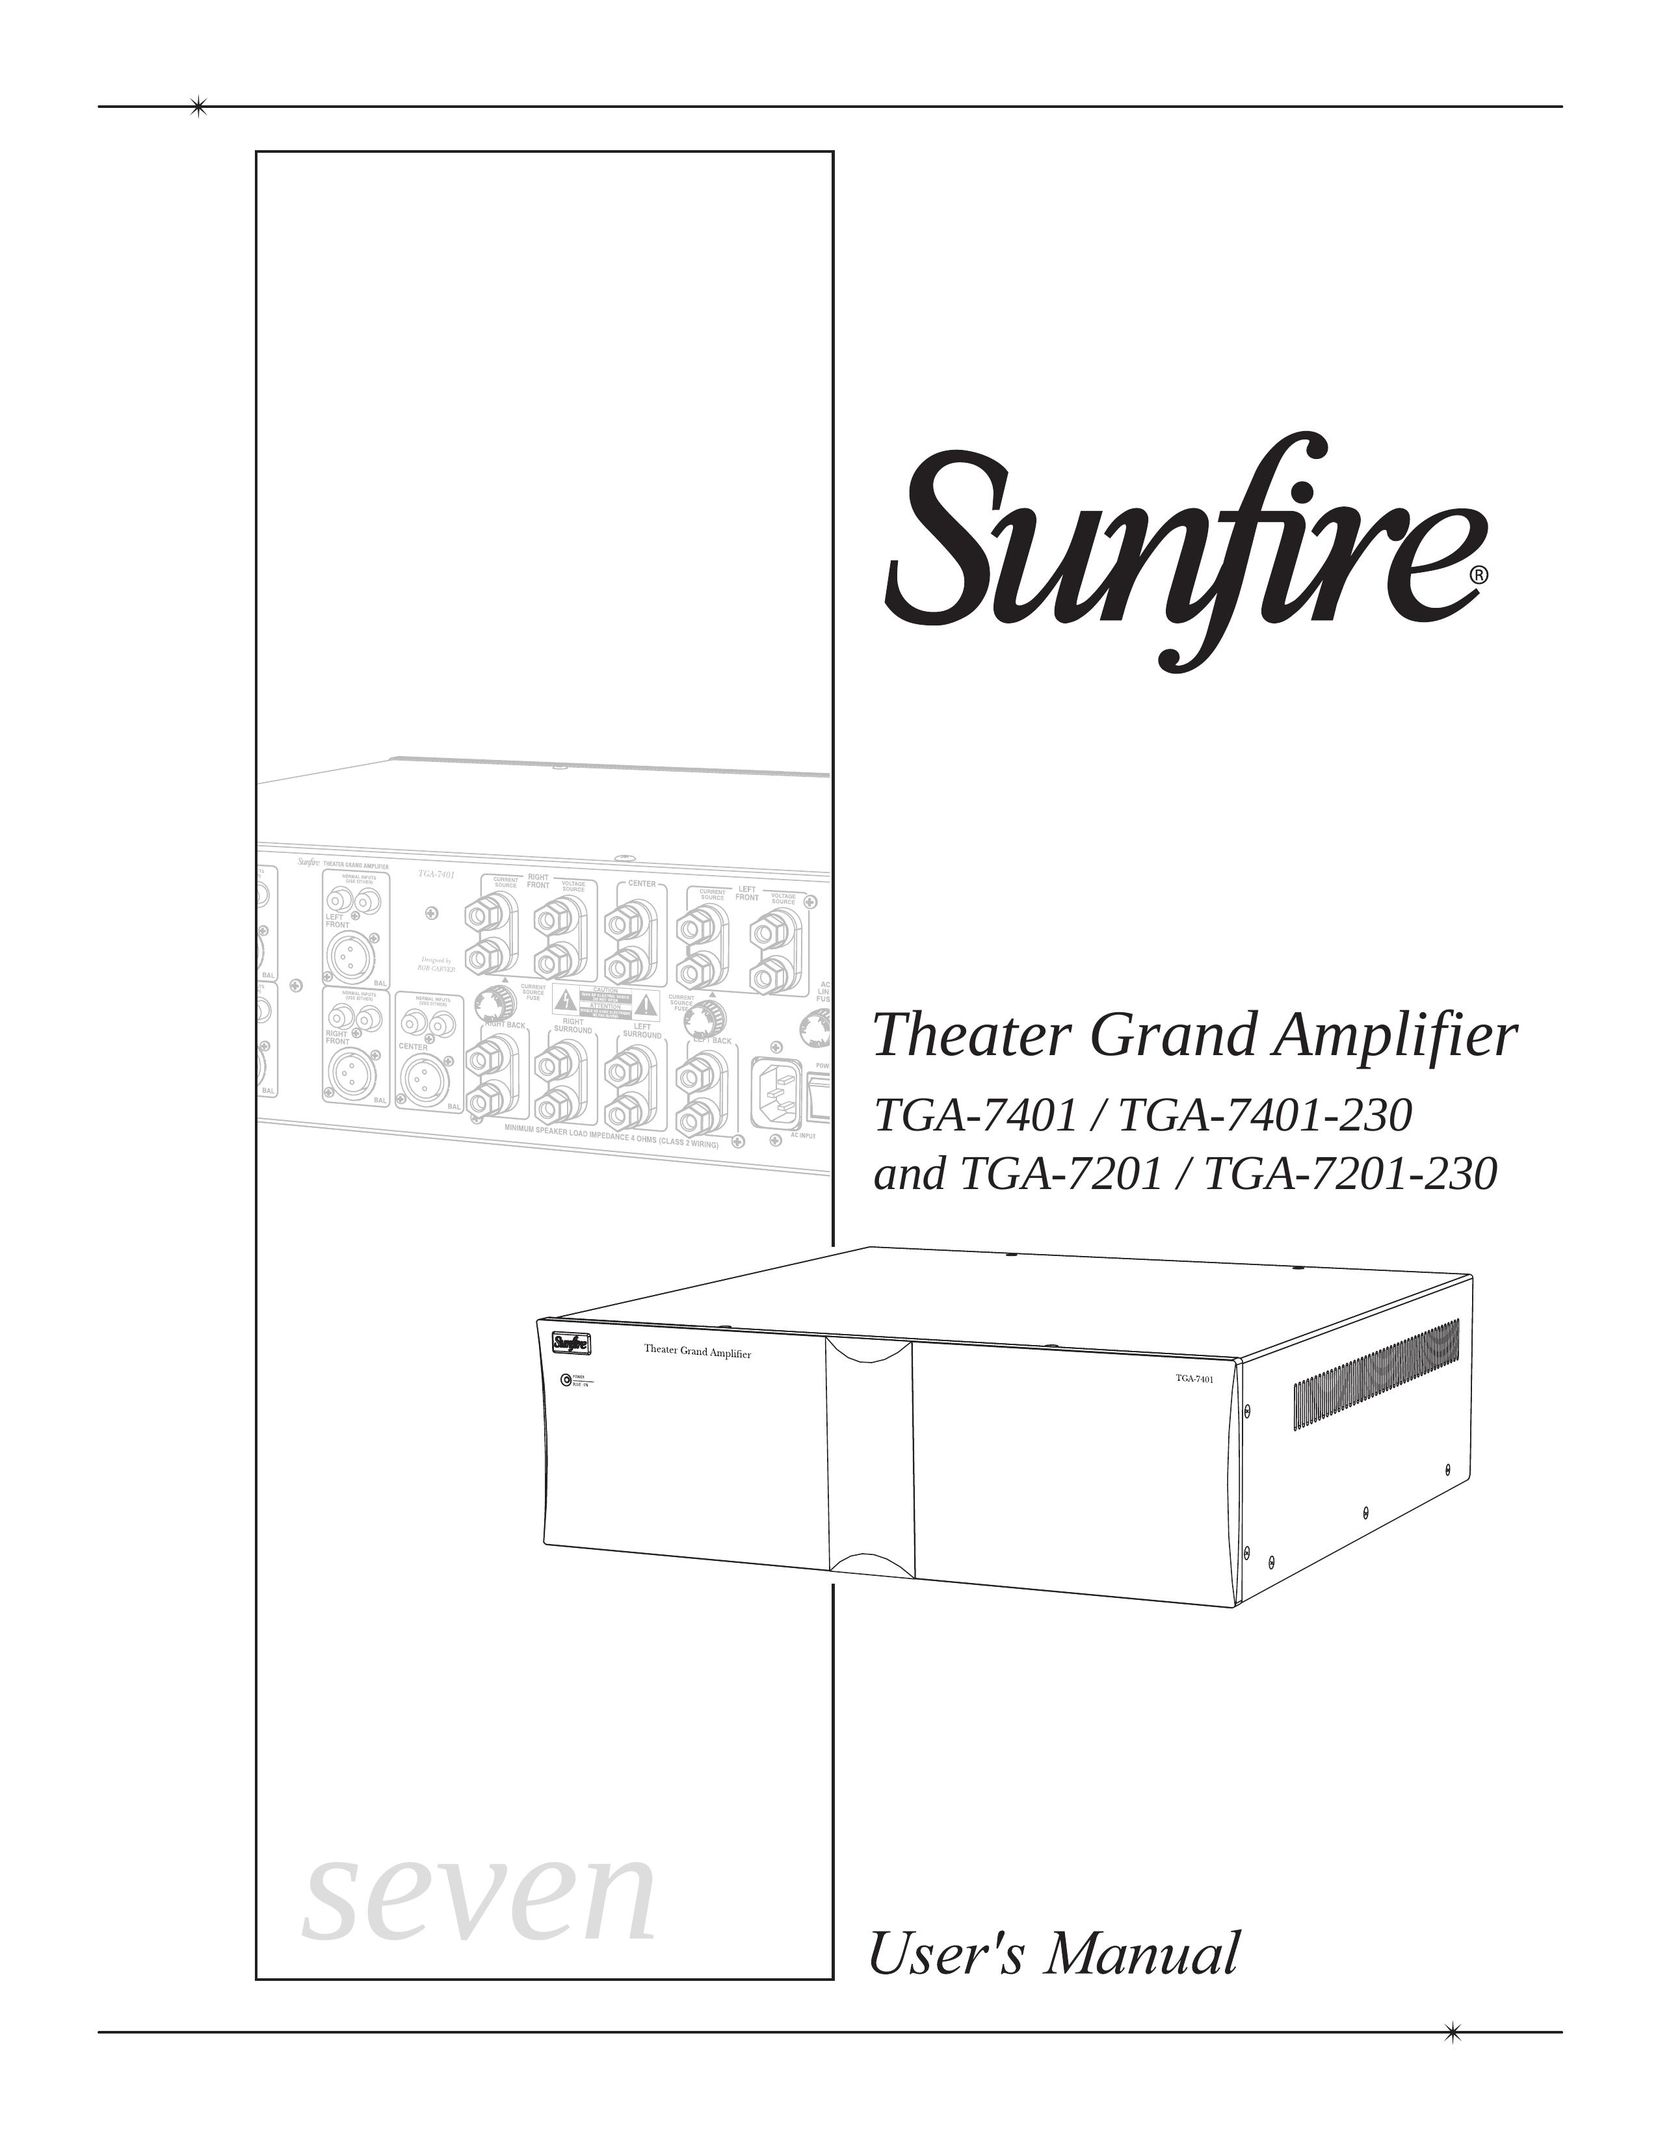 Sunfire TGA-7201-230 Home Theater System User Manual